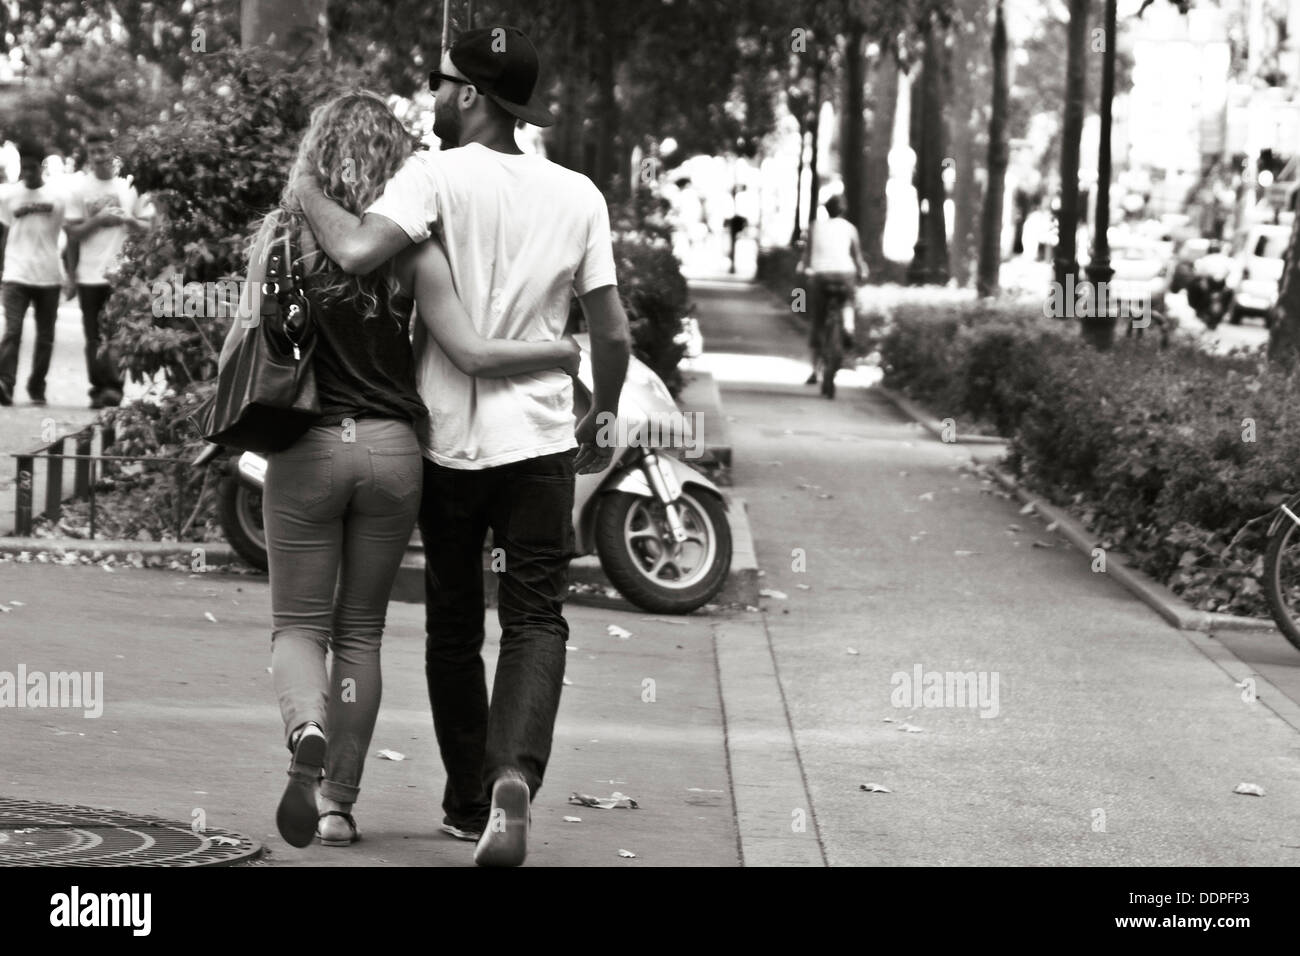 Lovers walking down a street in Paris, France Banque D'Images